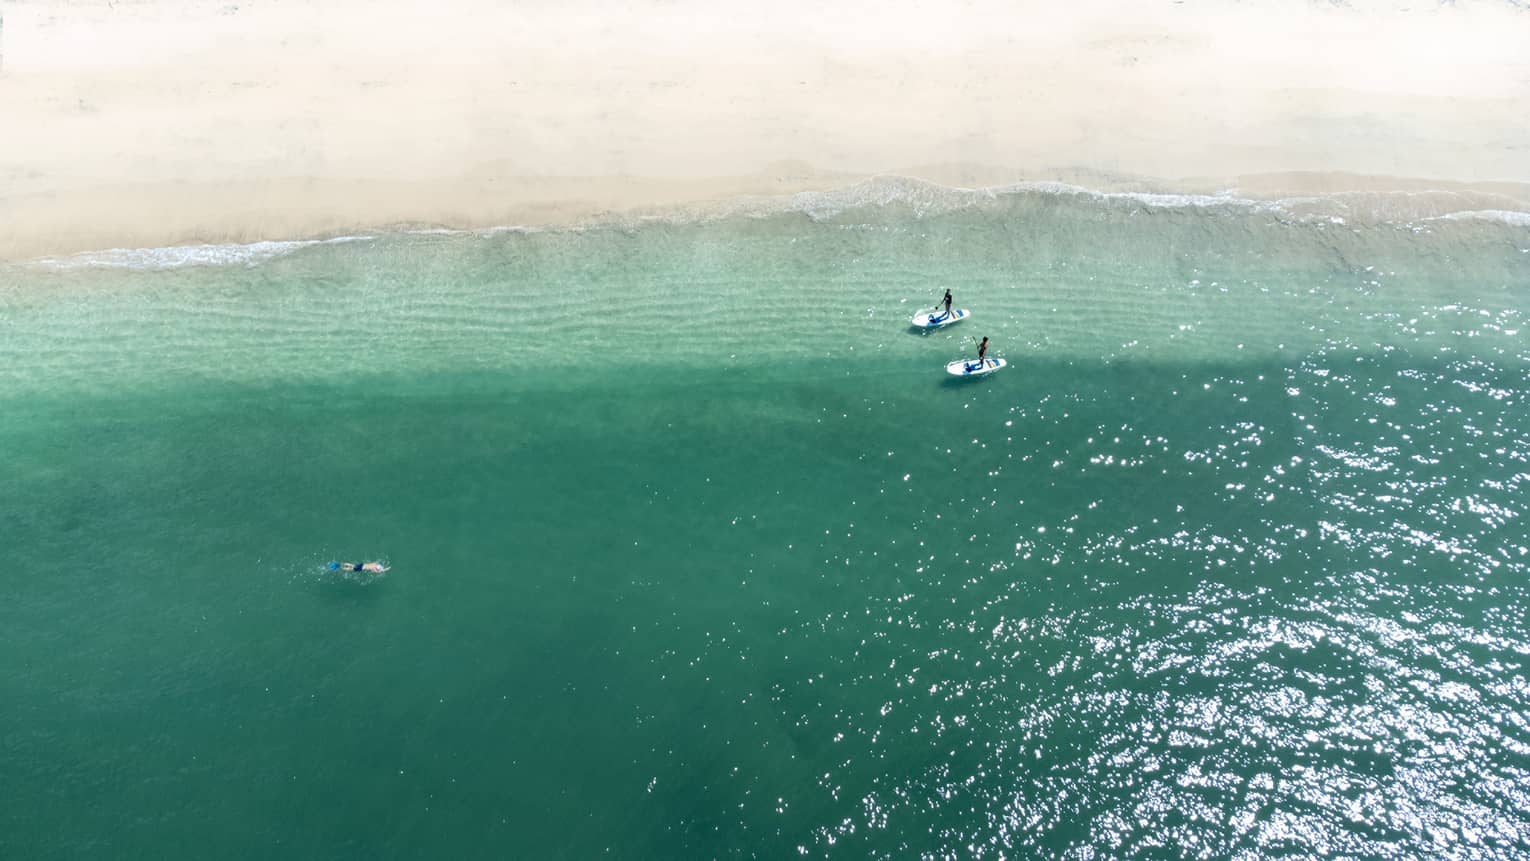 Distant aerial view of two people riding stand-up paddleboards near the shoreline